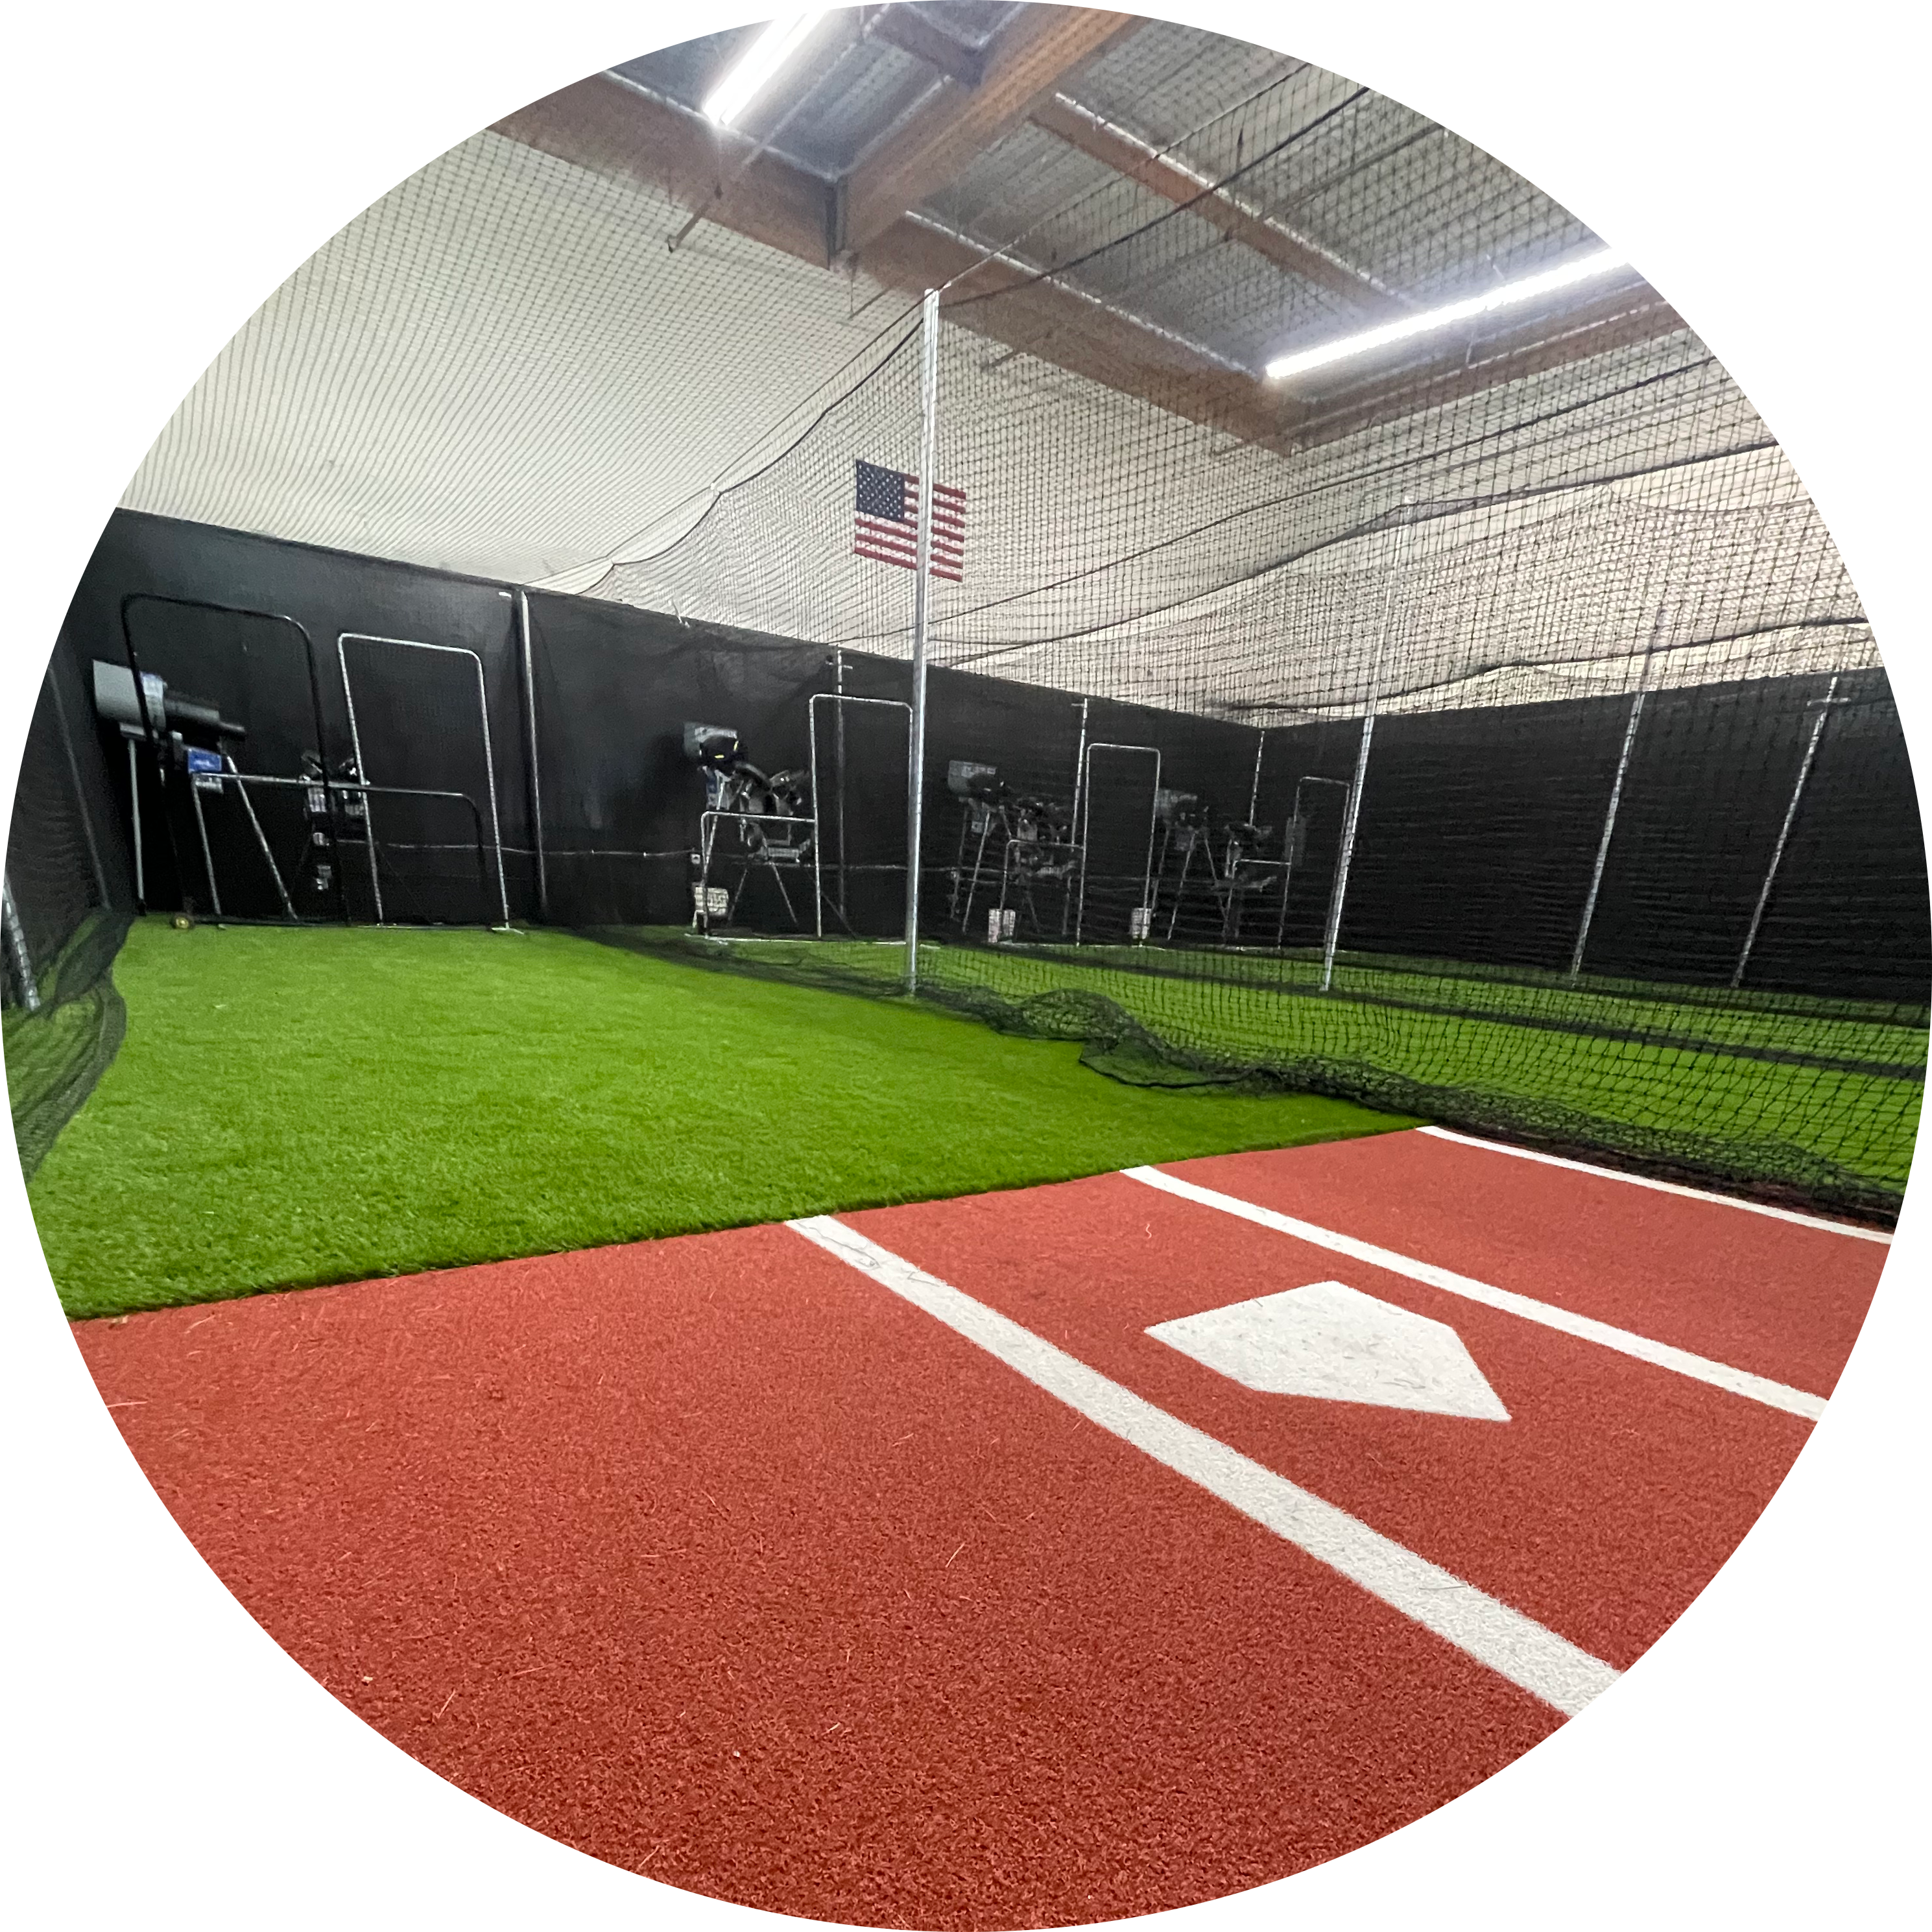 Picture from corner of the facility with a view of all four batting cages.